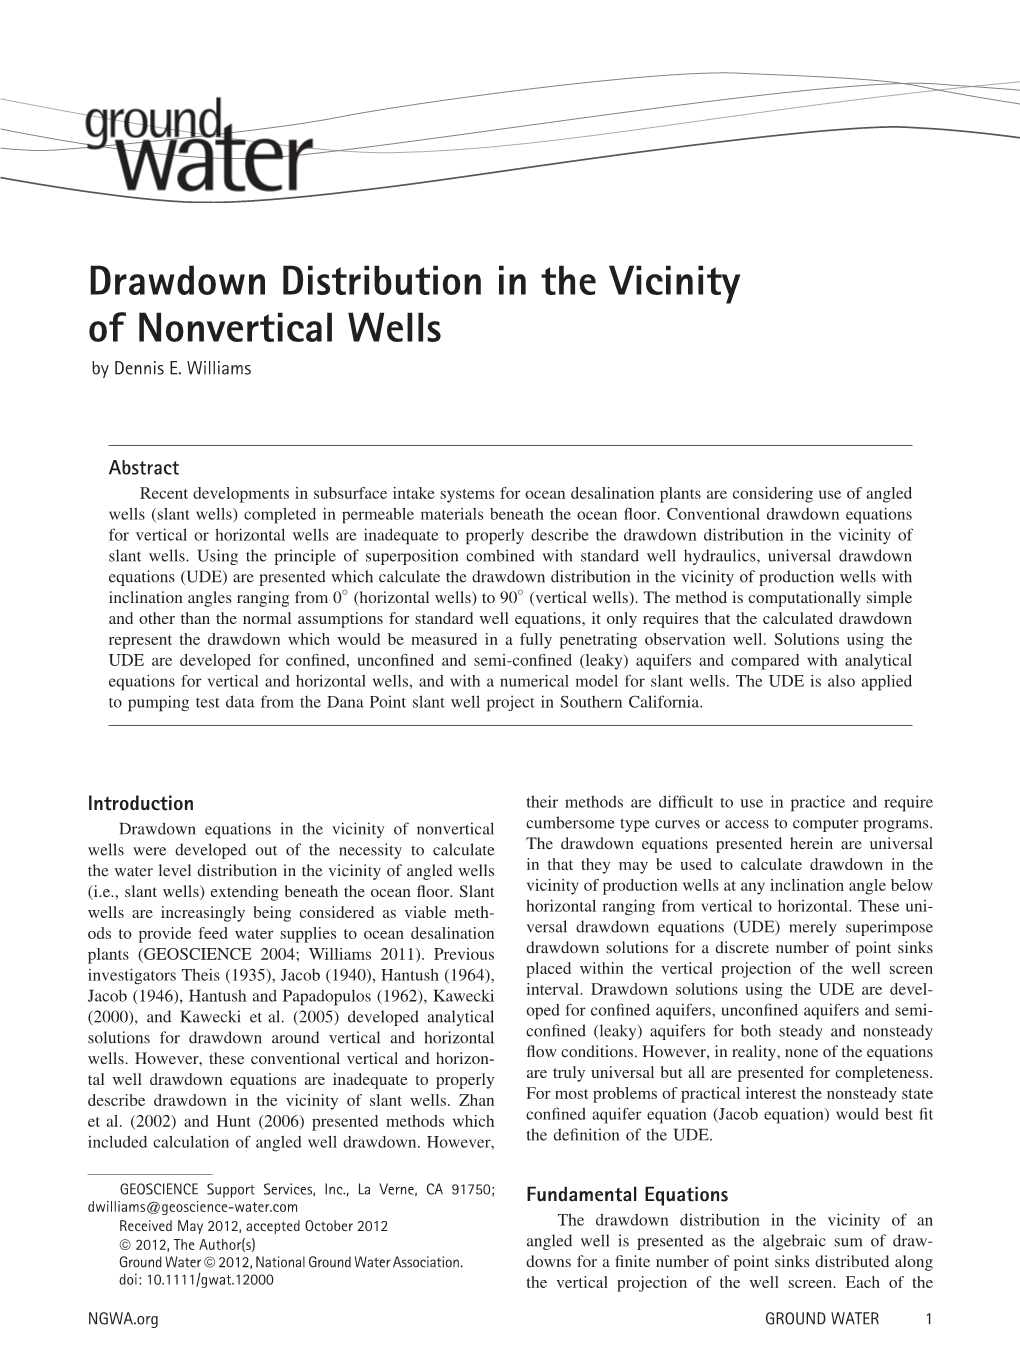 Drawdown Distribution in the Vicinity of Nonvertical Wells by Dennis E